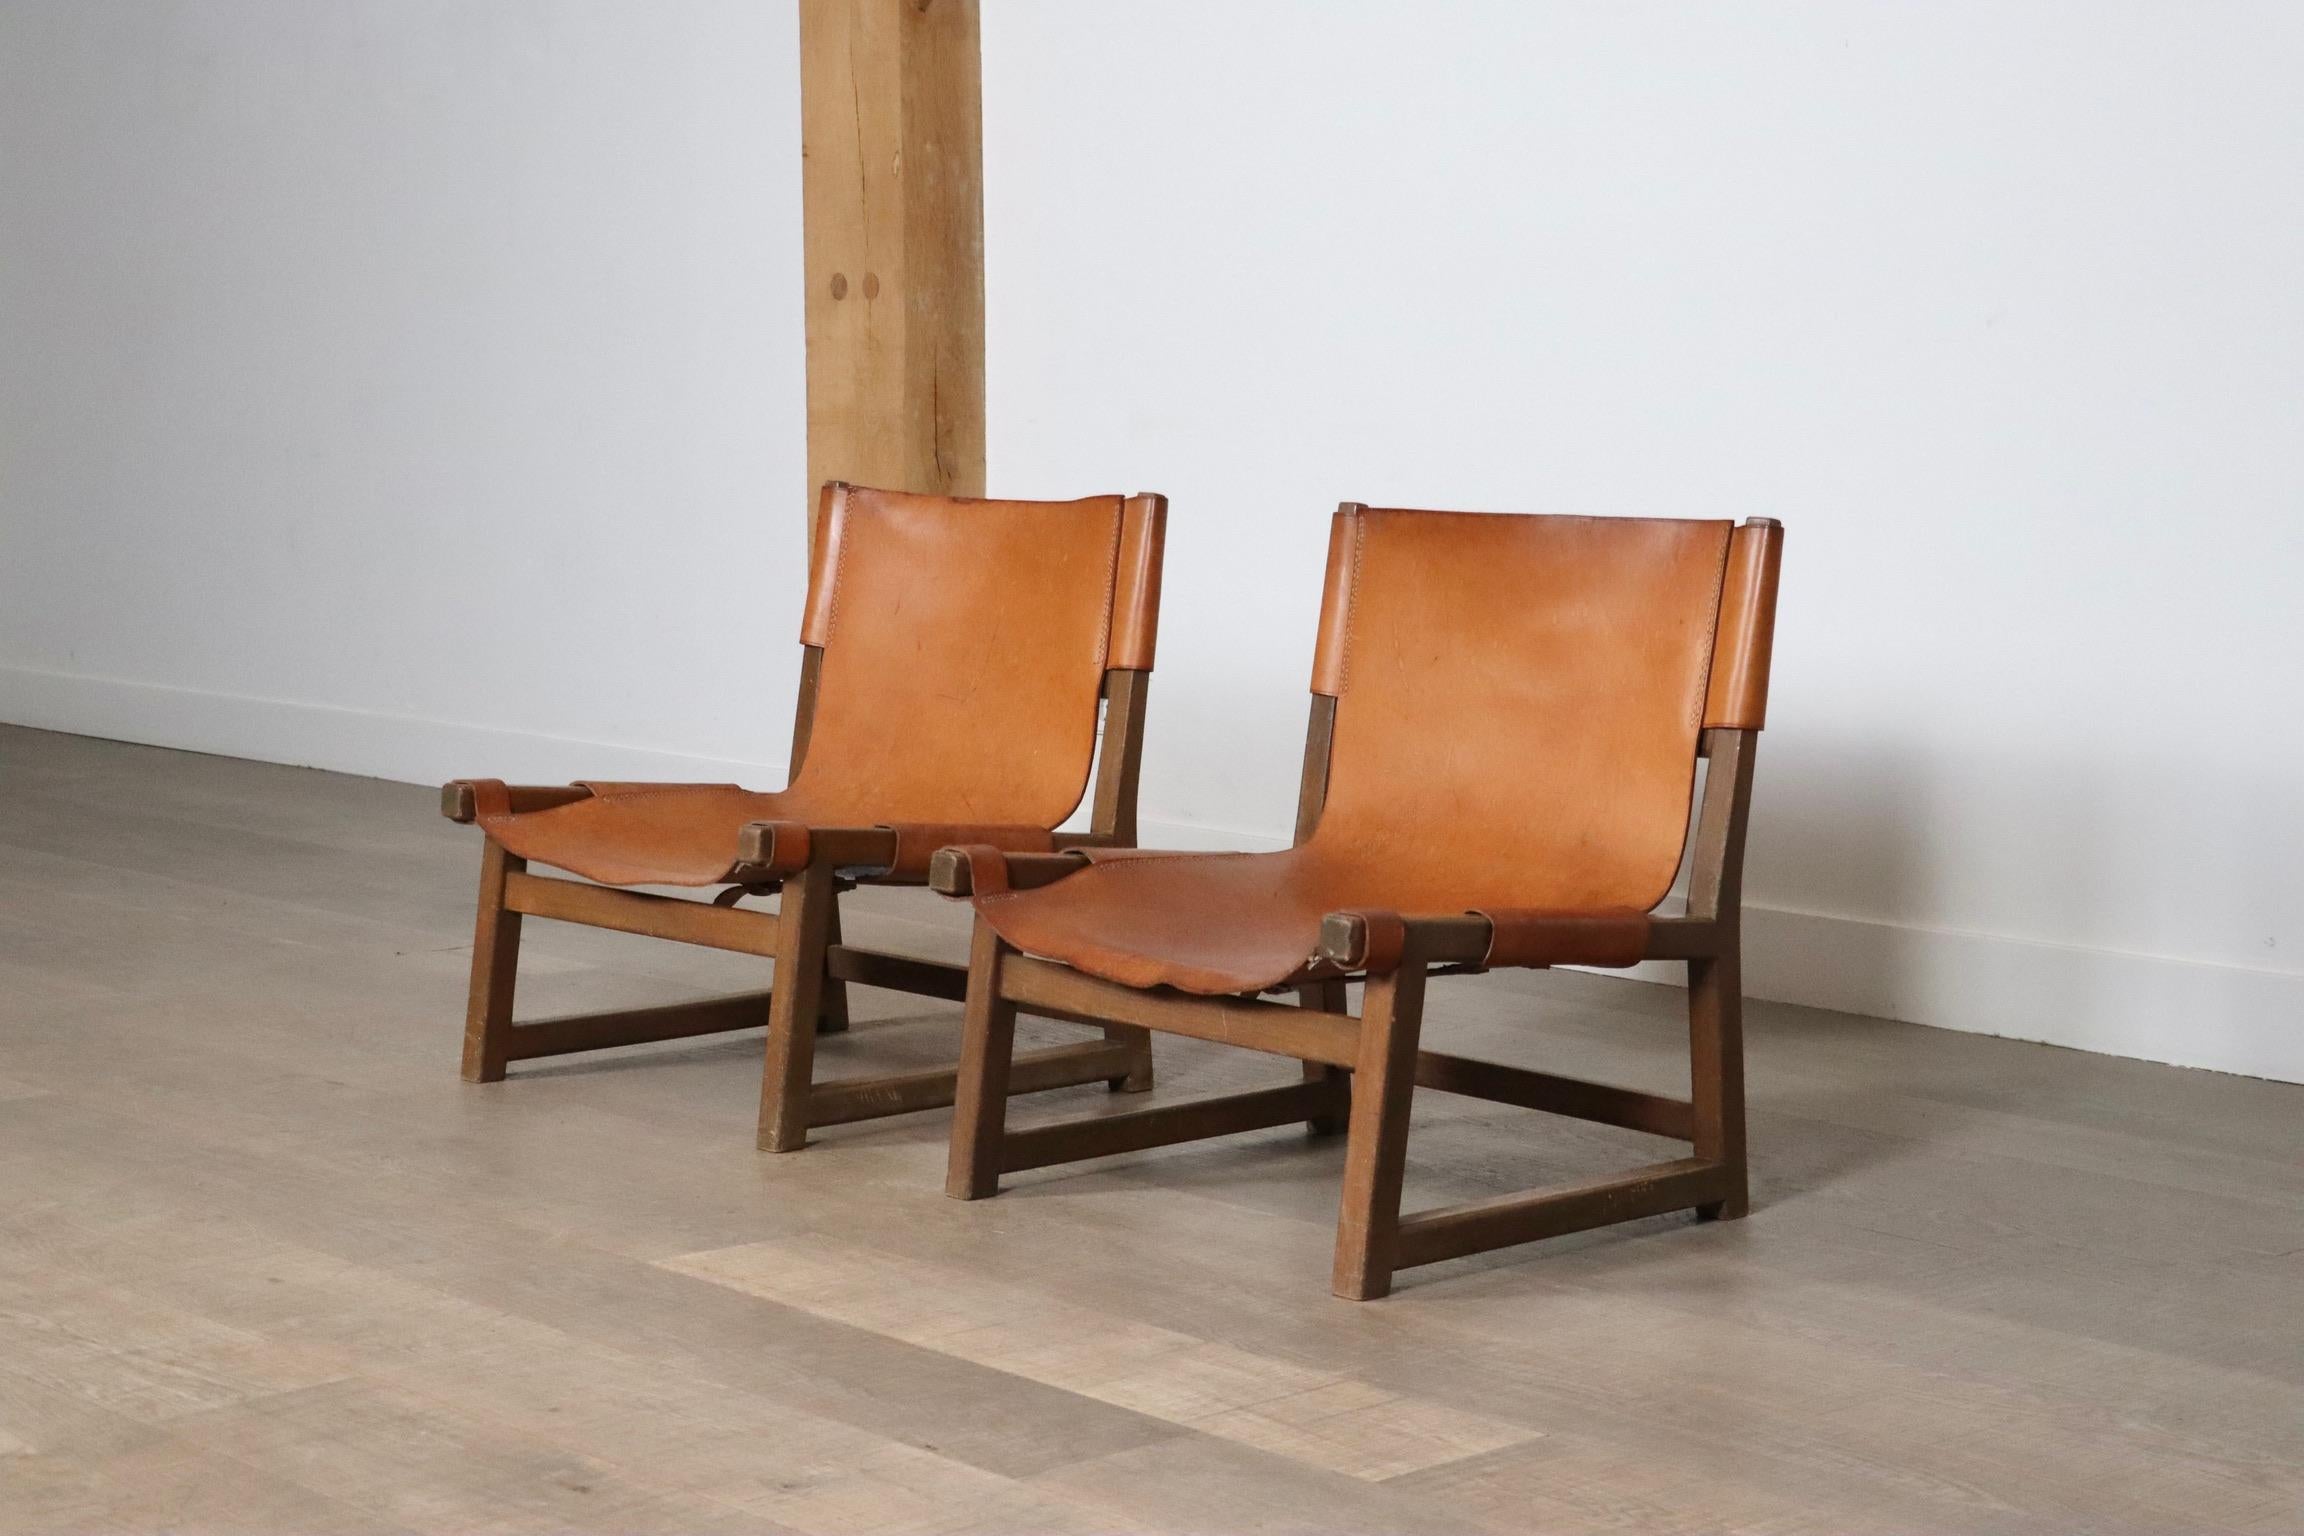 Pair Of Riaza Chairs In Cognac Leather By Paco Muñoz For Darro Gallery, Spain, 1 For Sale 2